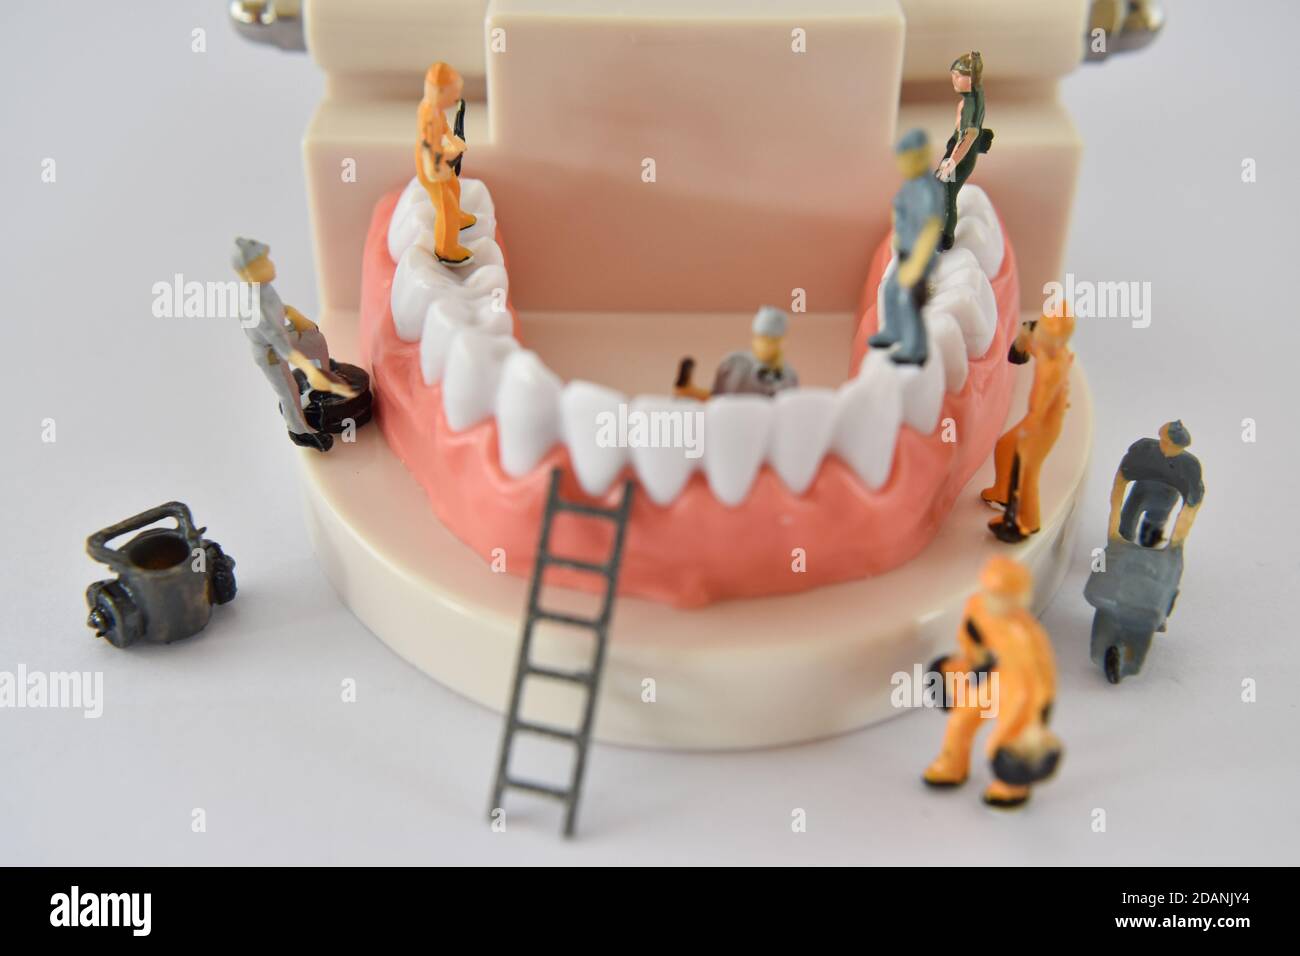 miniature people to repair a tooth or small figure worker cleaning tooth model as medical and healthcare. cleaning dental care or dentist concept. Stock Photo